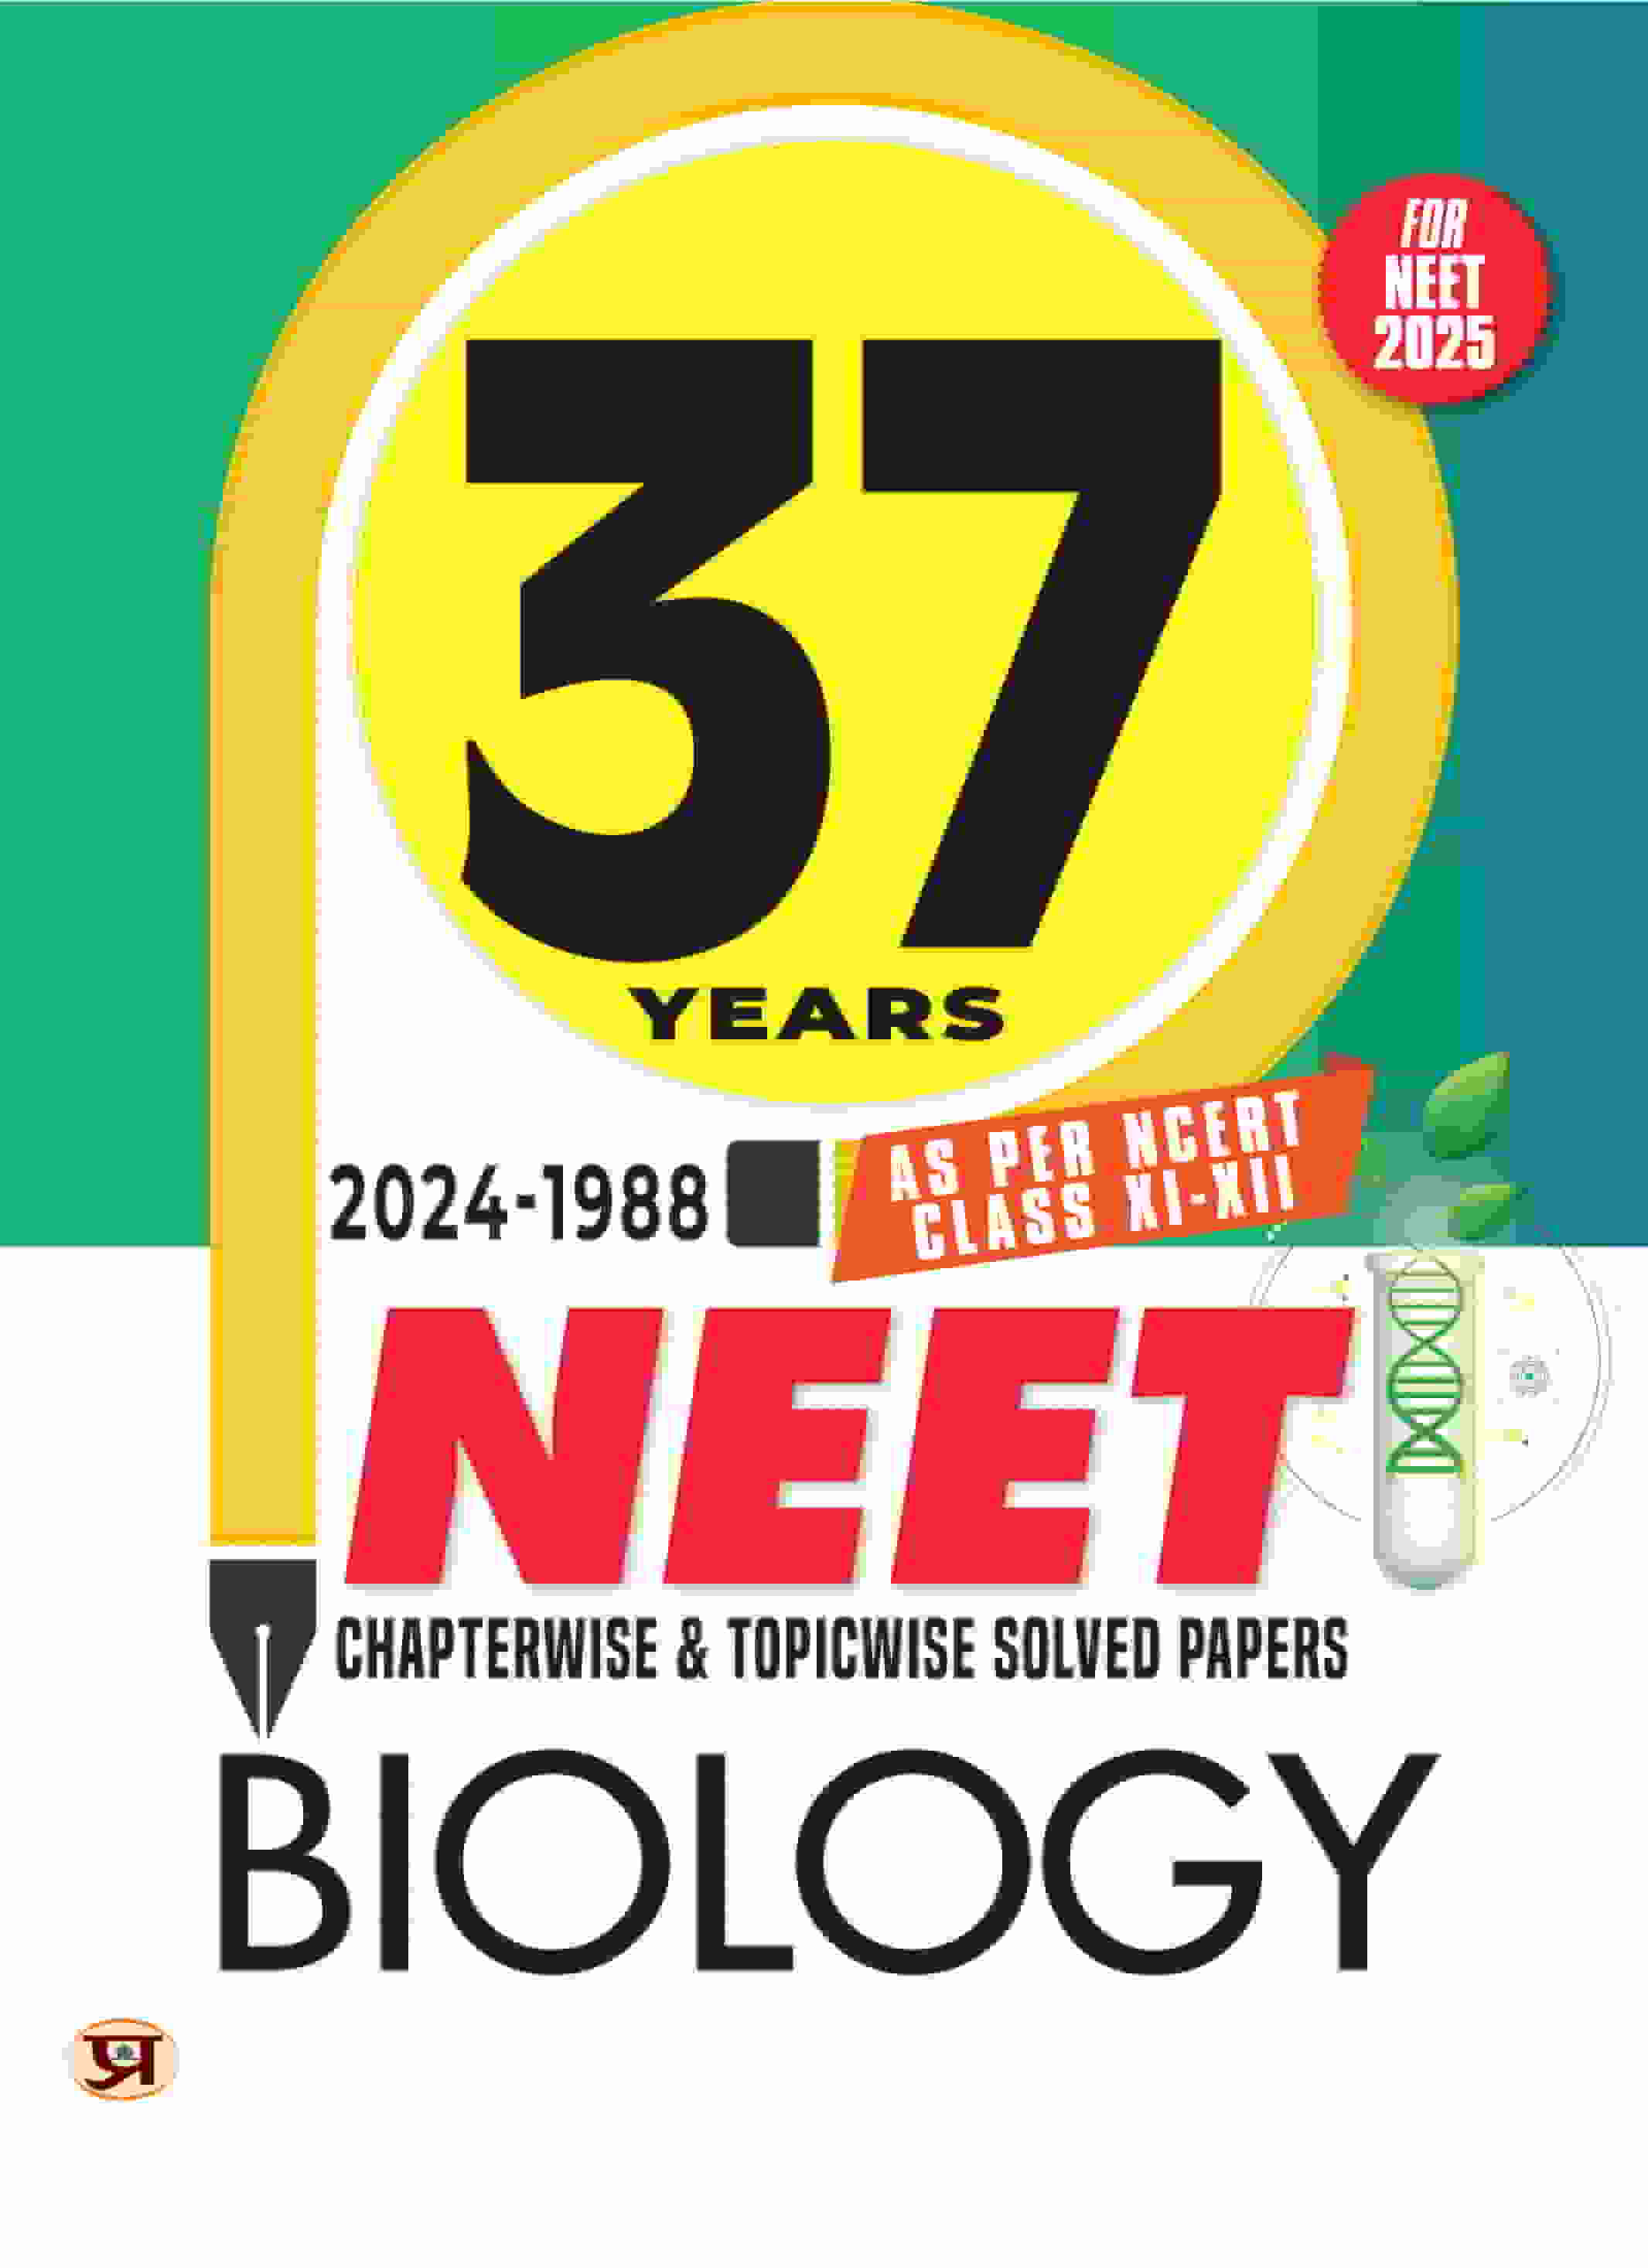 37 Years NEET Chapterwise & Topicwise Solved Papers Biology (2024-1998) | As Per NCERT Class 11 & 12 Include New Syllabus PYQs Question Bank For 2025 Exam